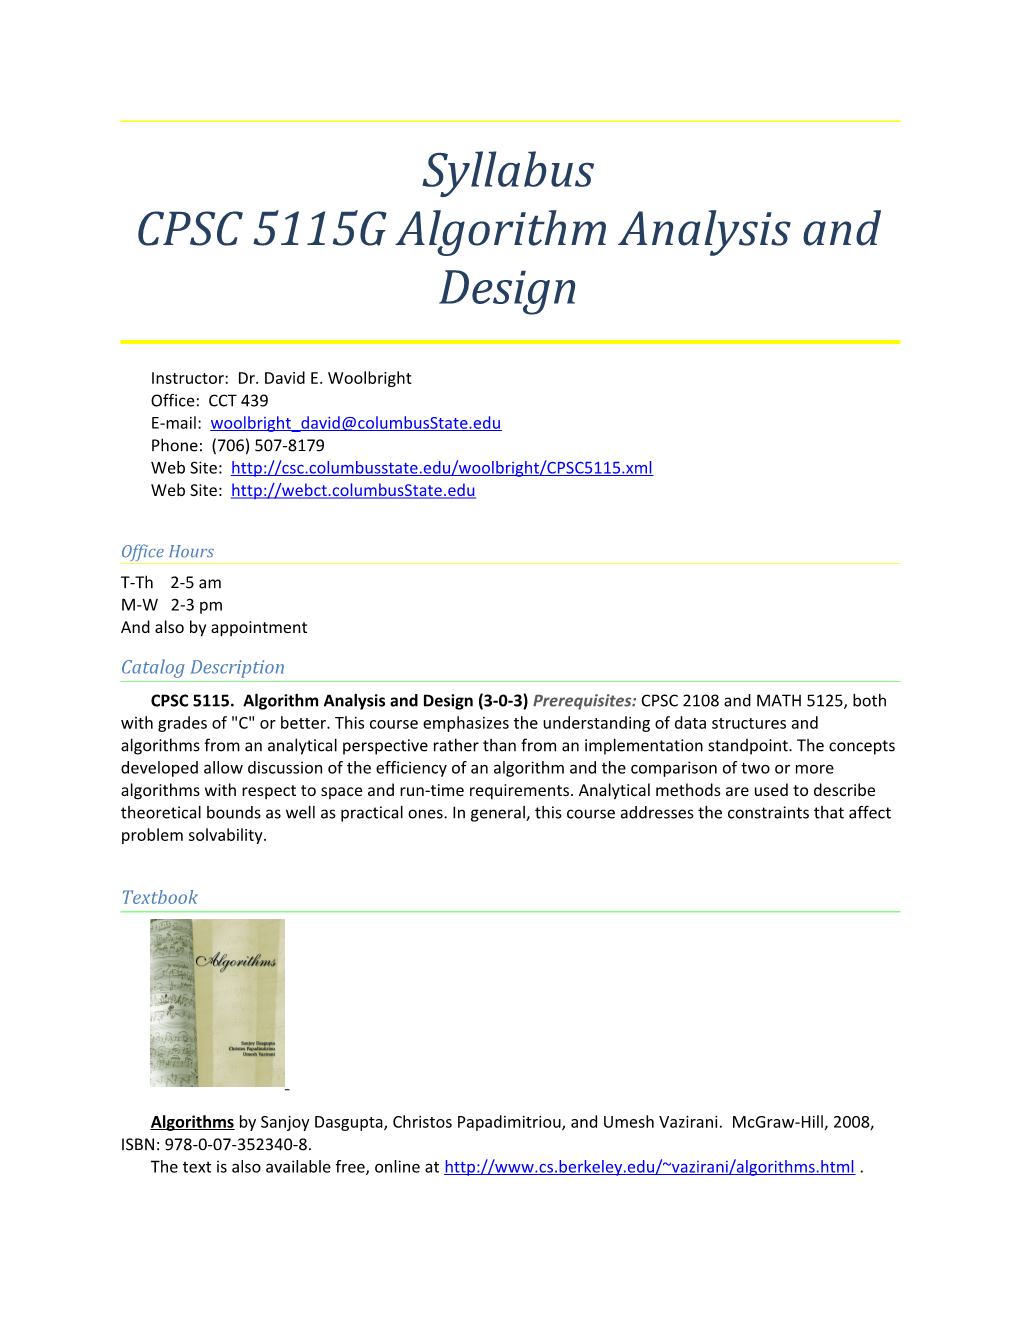 CPSC 5115G Algorithm Analysis and Design